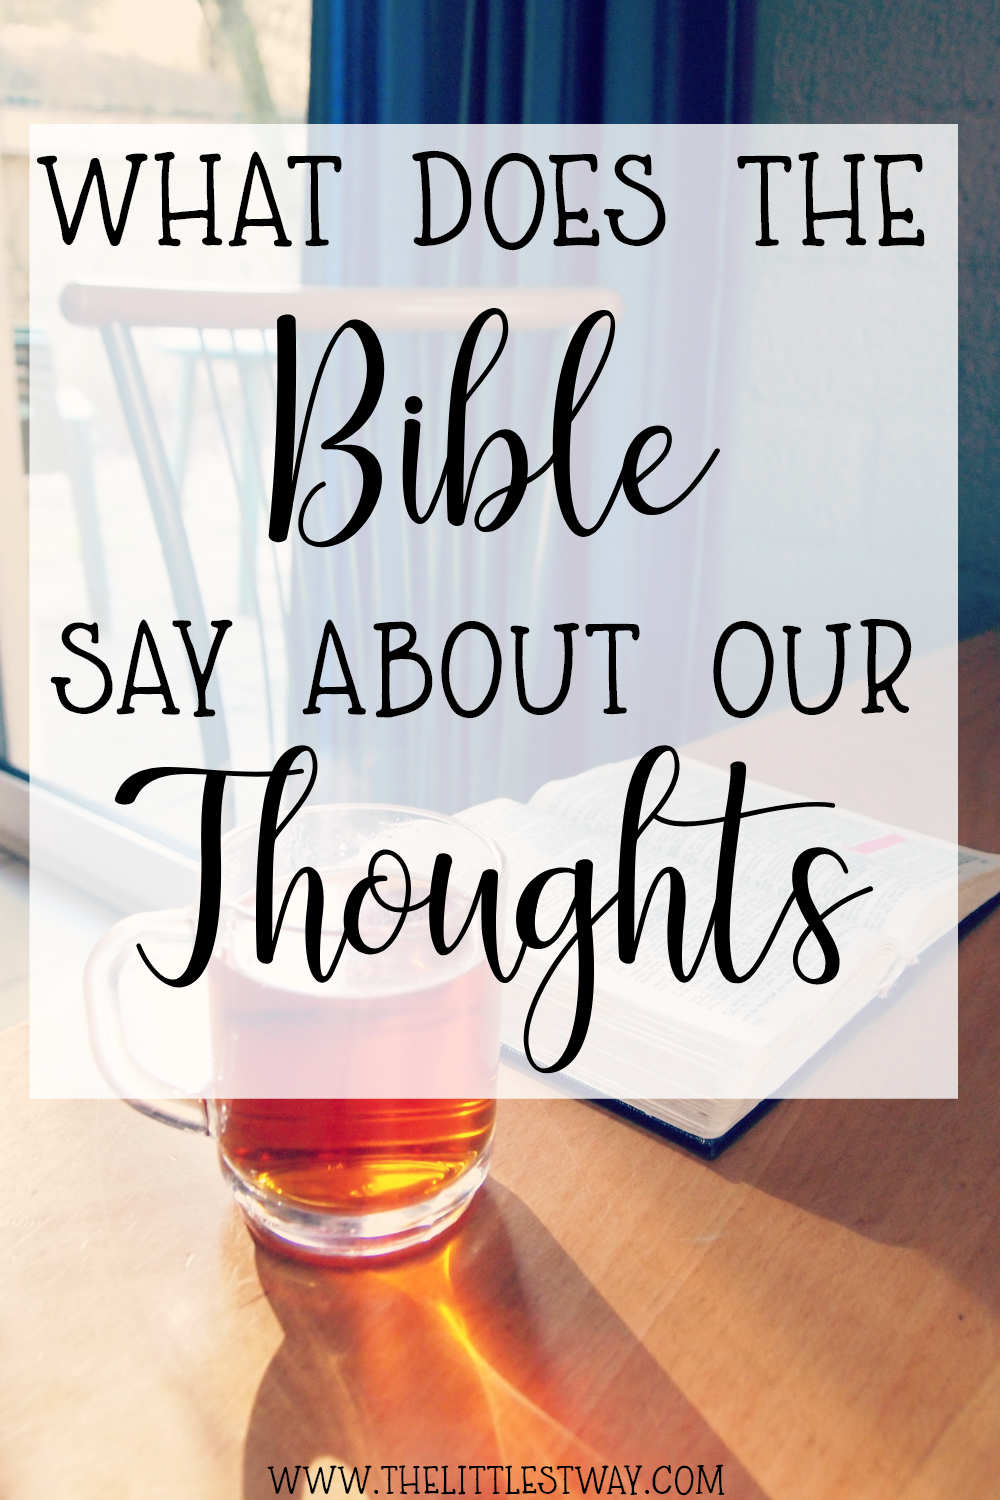 The Bible has more than you might think to guide us in our thoughts.